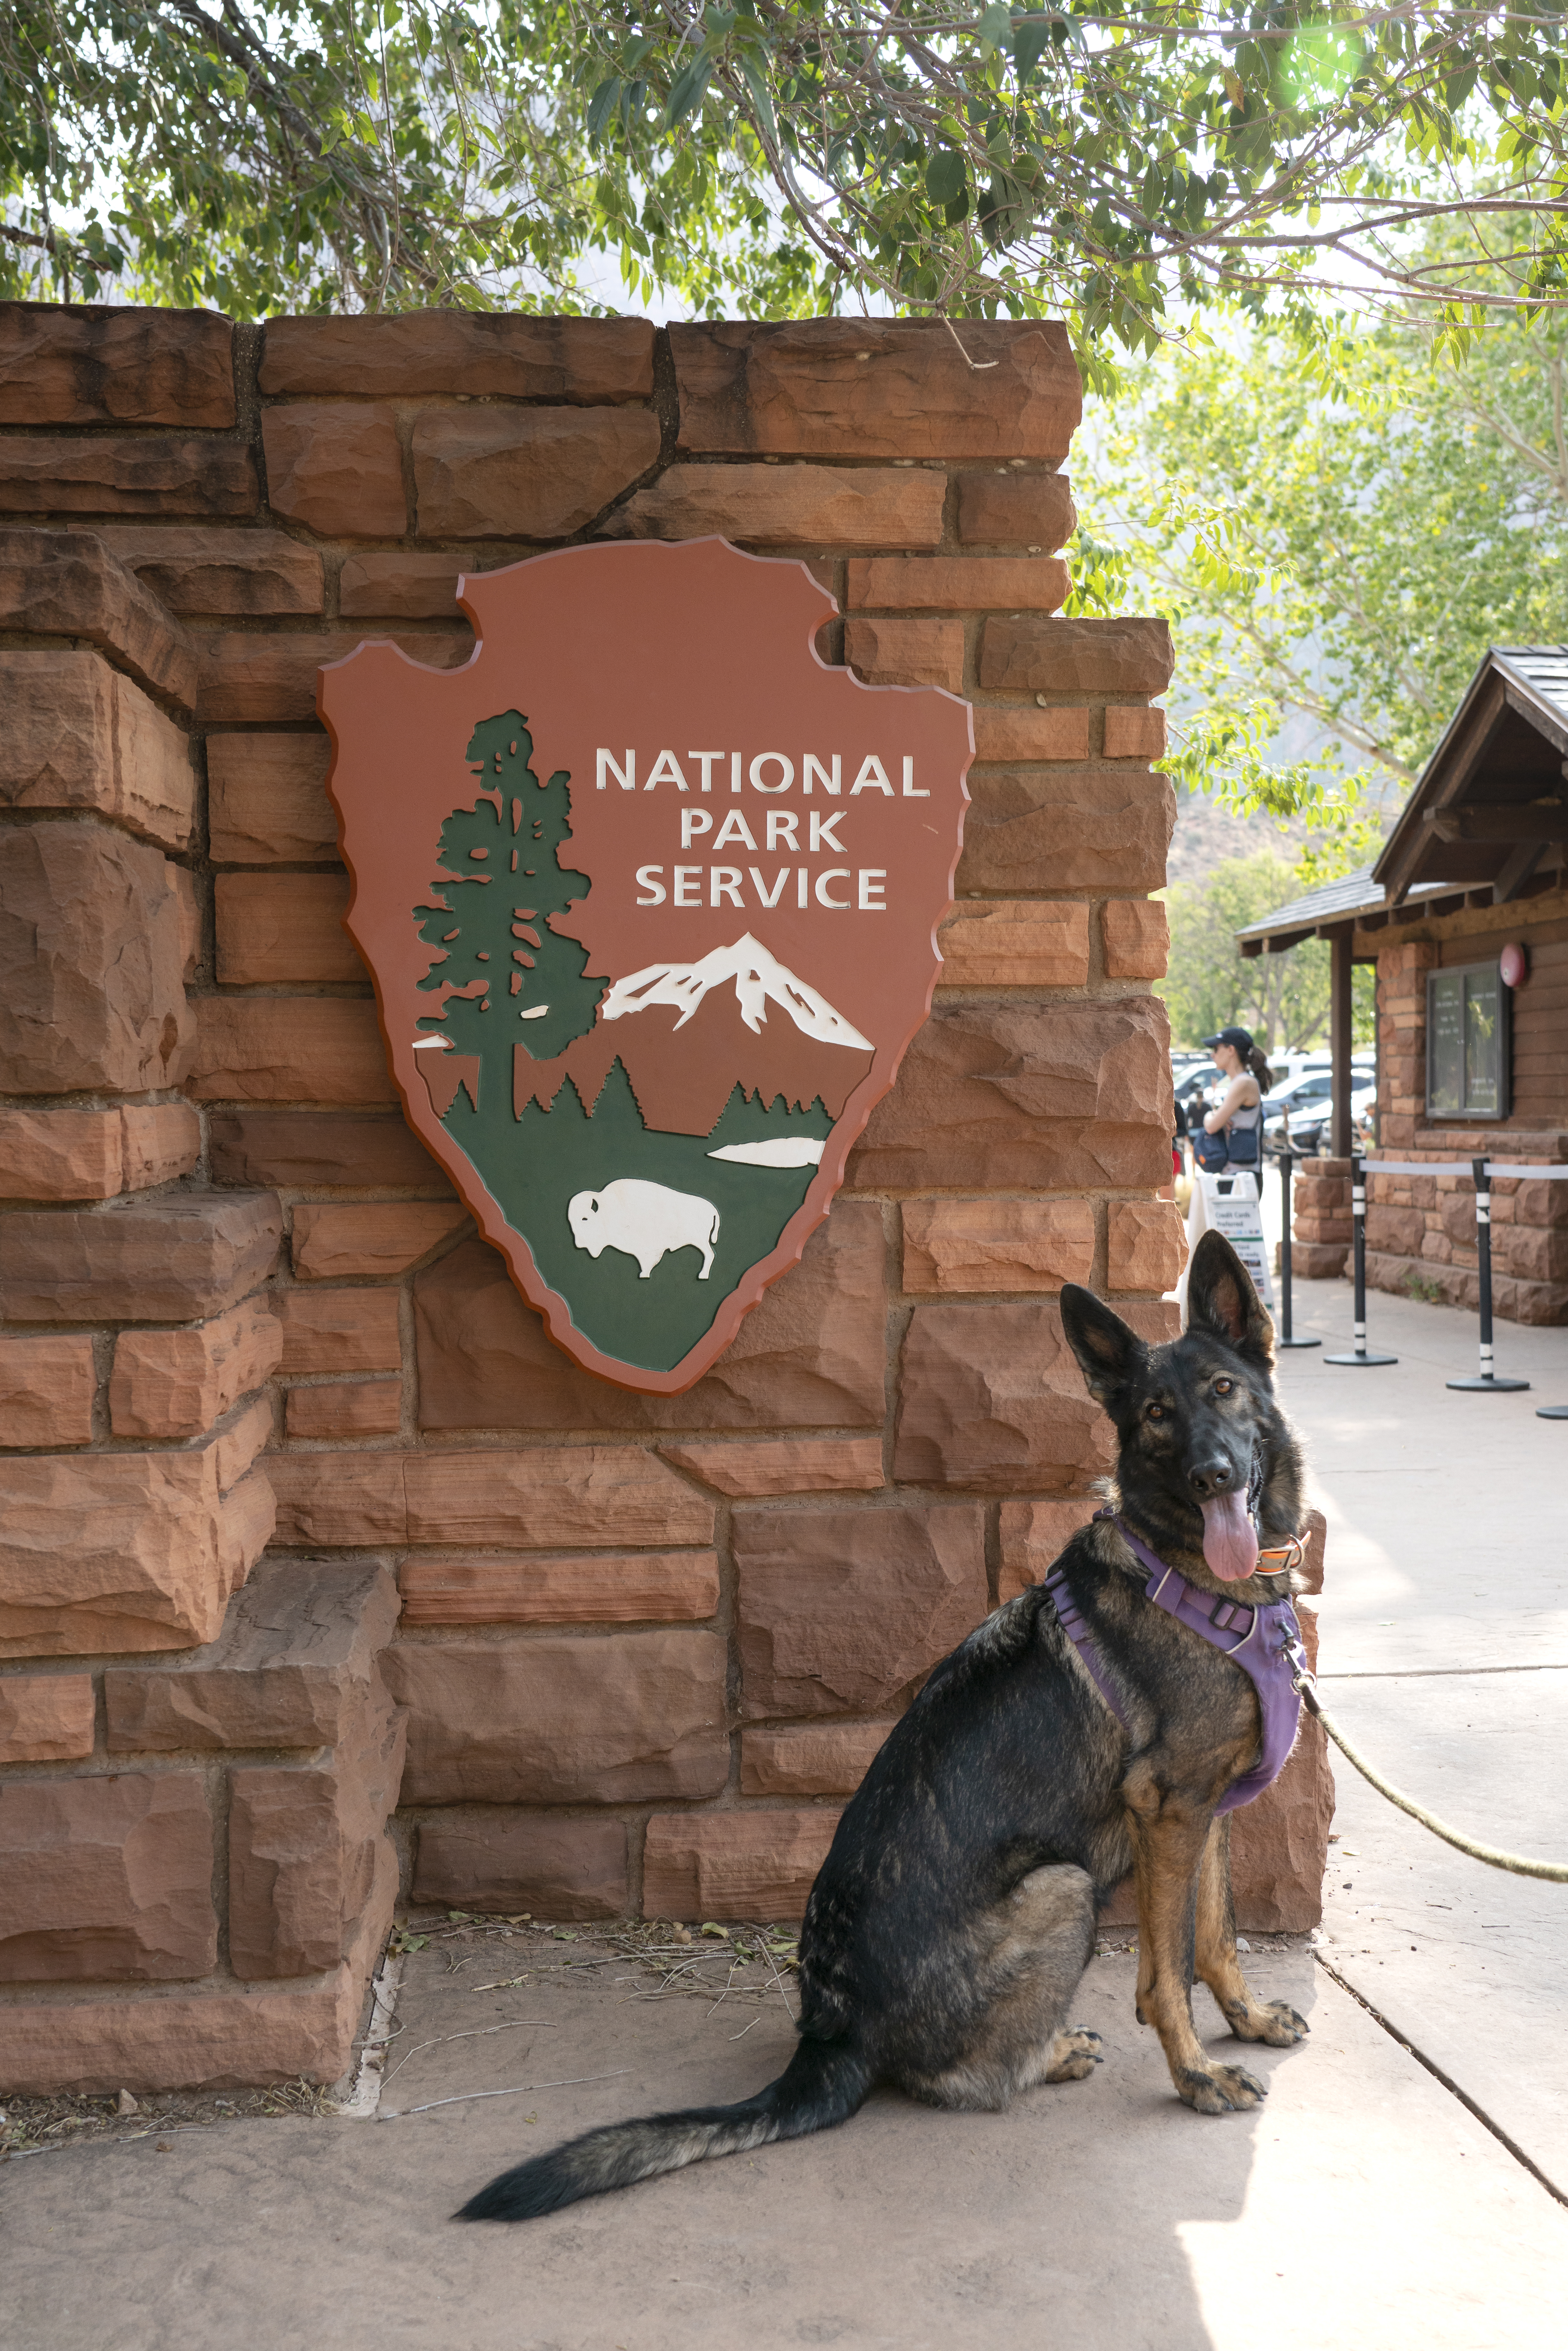 One dog sits in front of a red sandstone stonewall with the NPS Arrowhead on it.